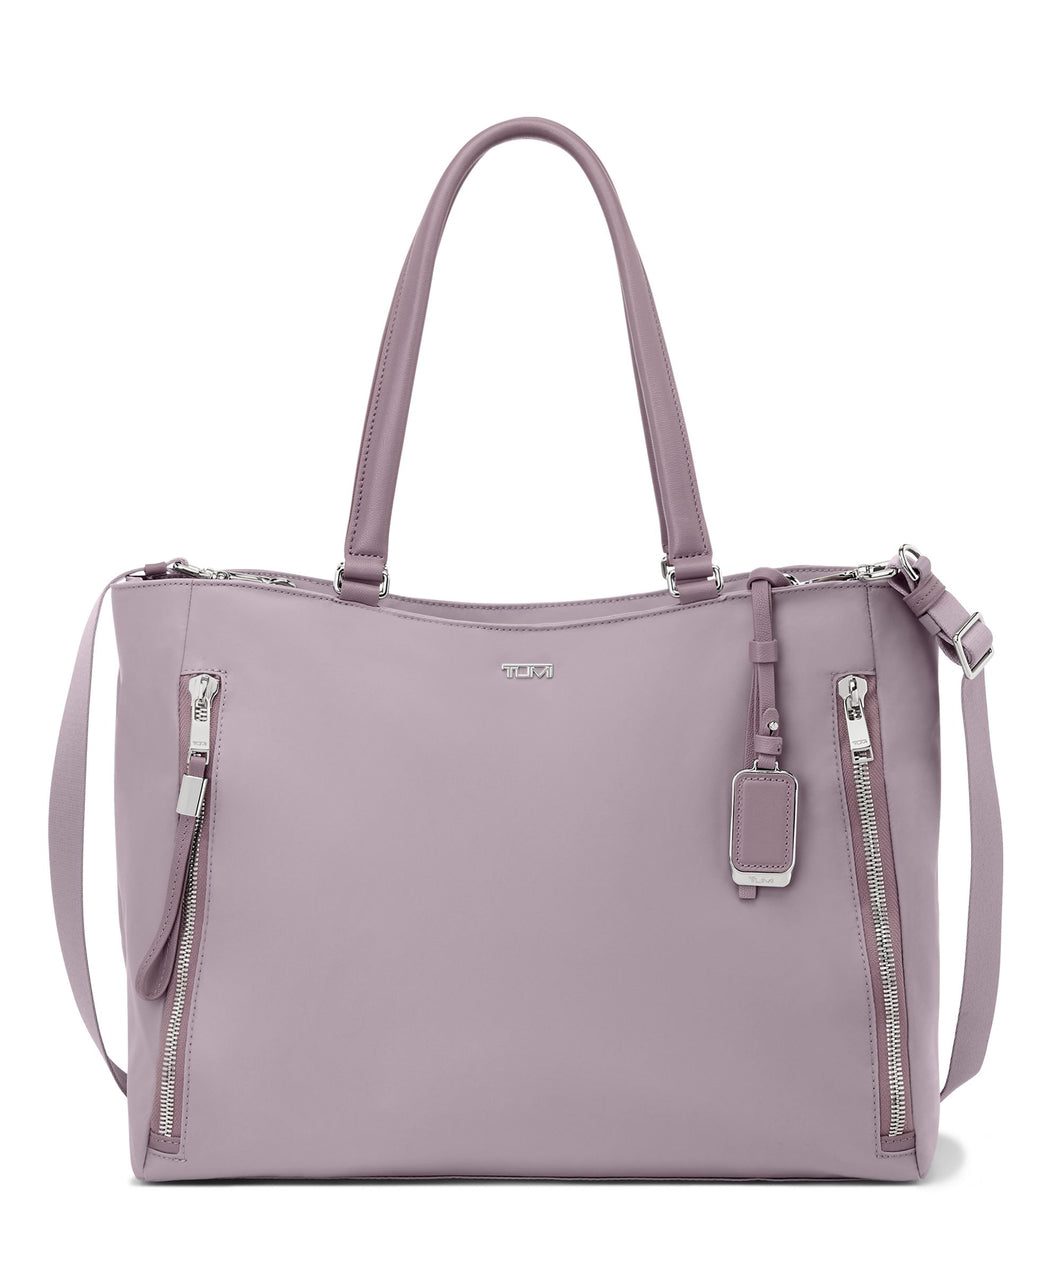 Tumi Voyageur Valetta Large Tote - Front View